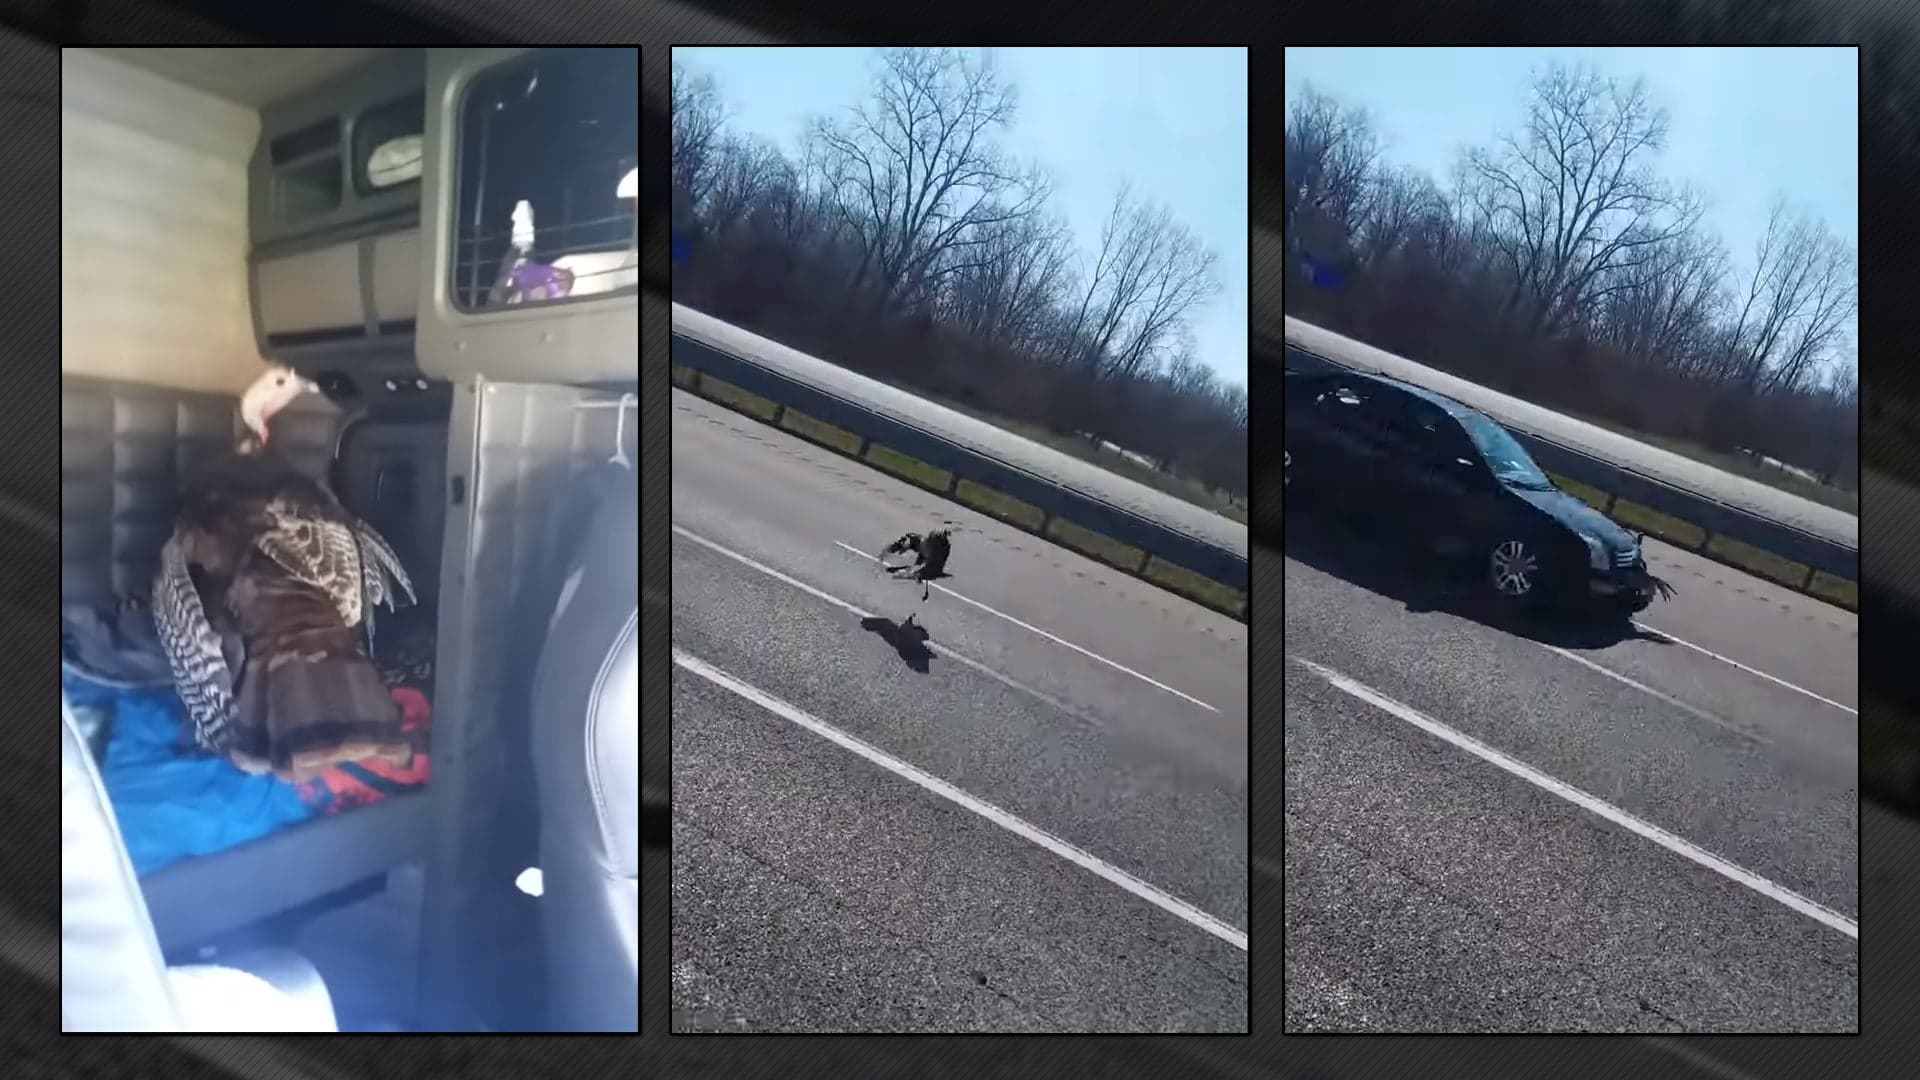 Watch a Turkey Survive Crashing Into Semi Truck at High Speed, Only to Escape and Get Hit by Other Car